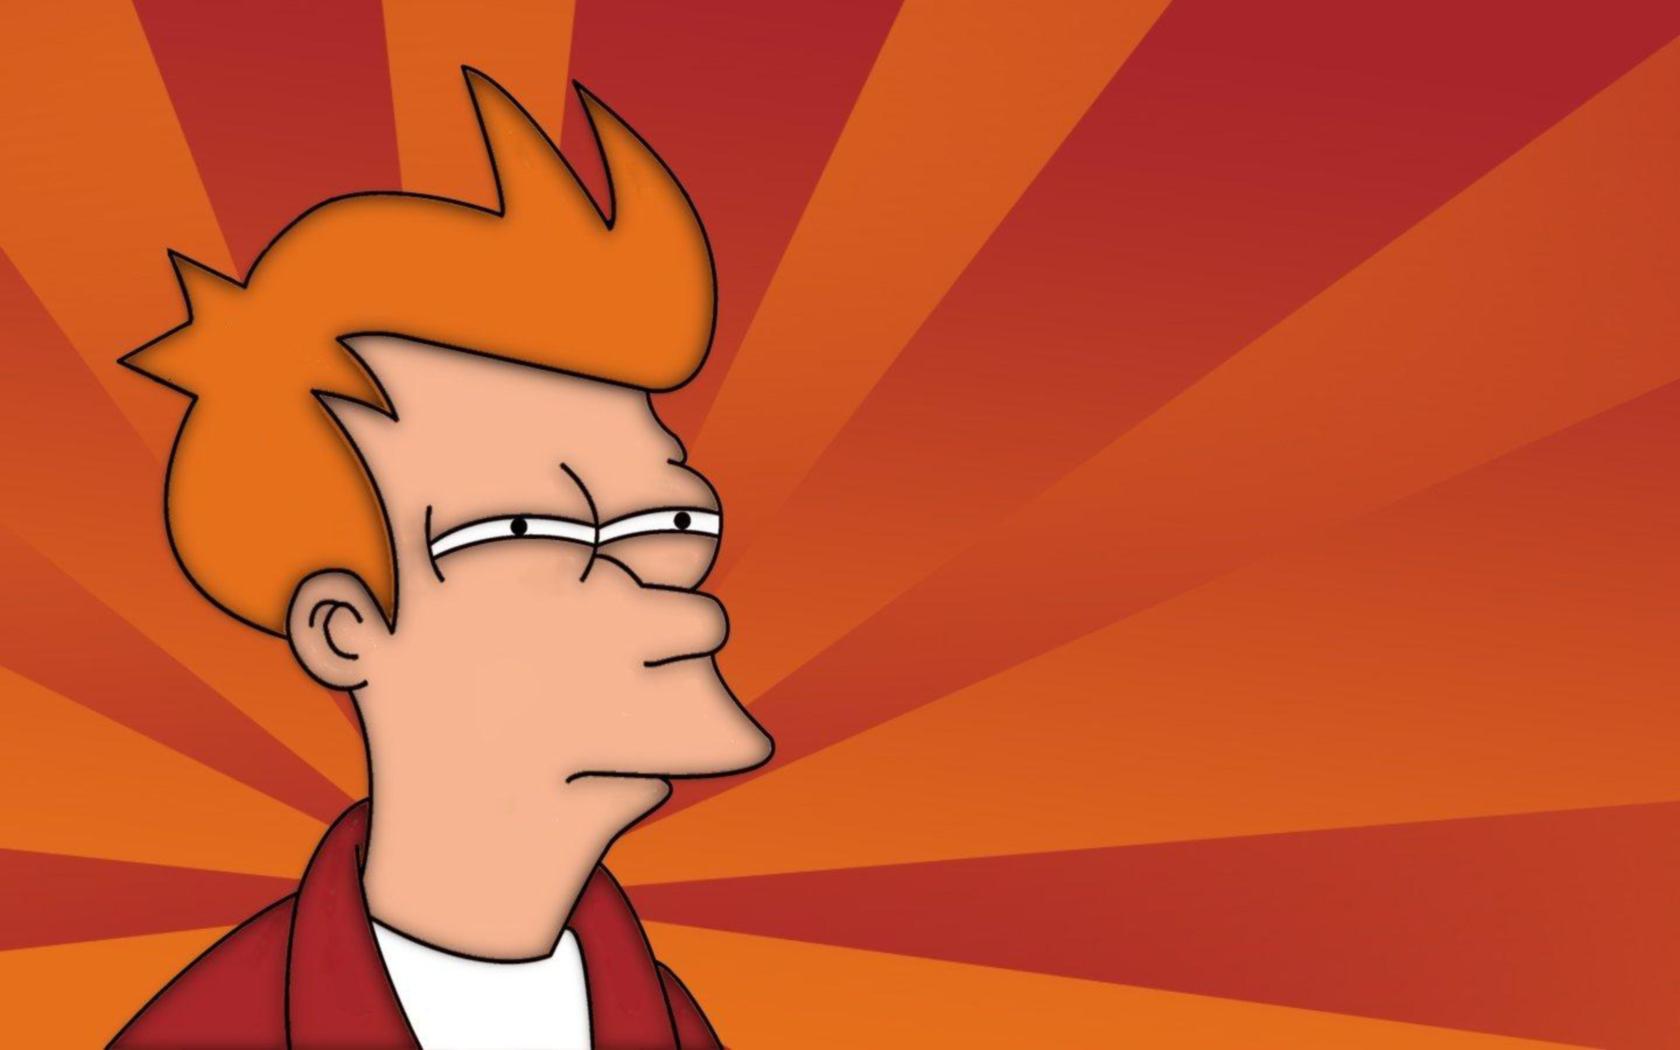 Futurama character Fry against a vibrant background.